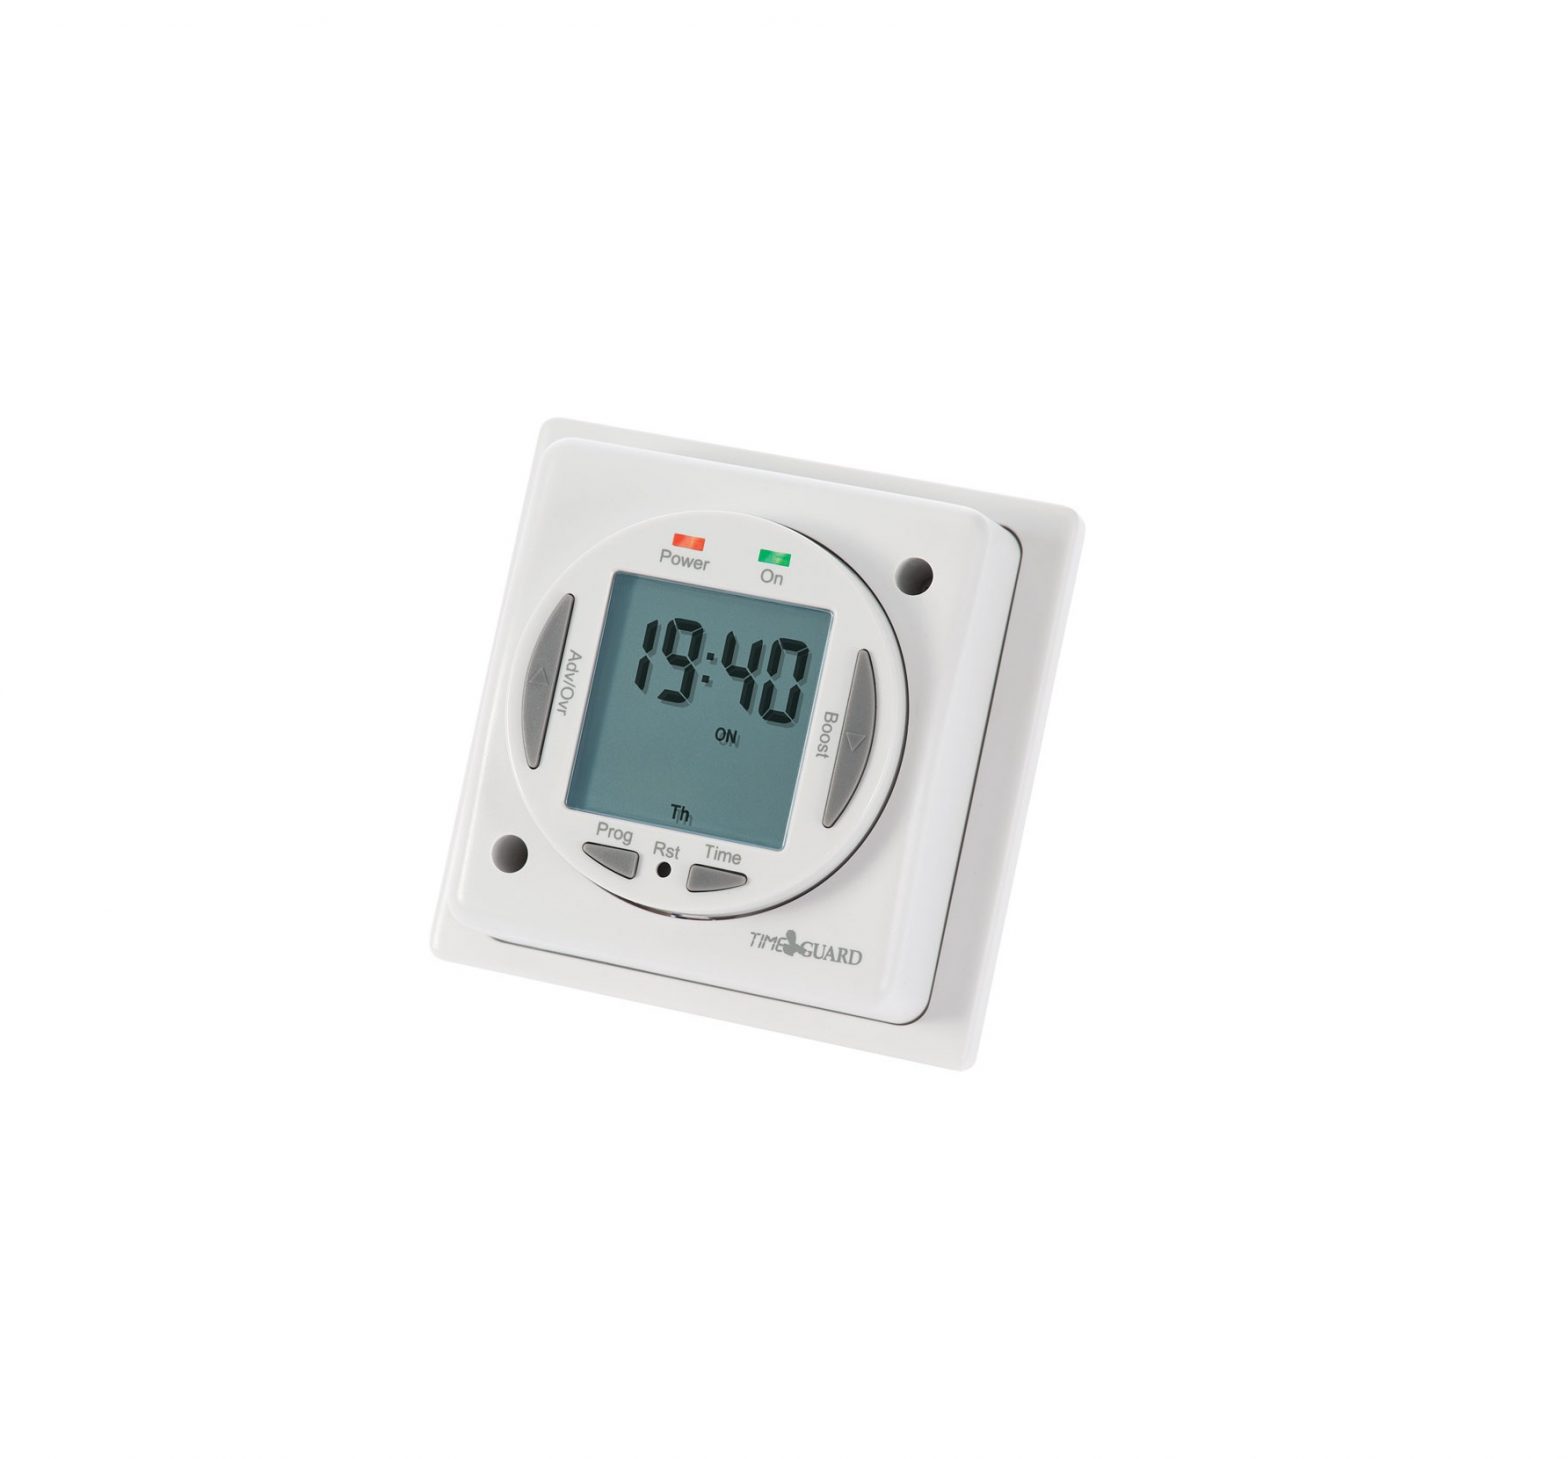 Timeguard 7 Day Digital Time Switch Installation Guide